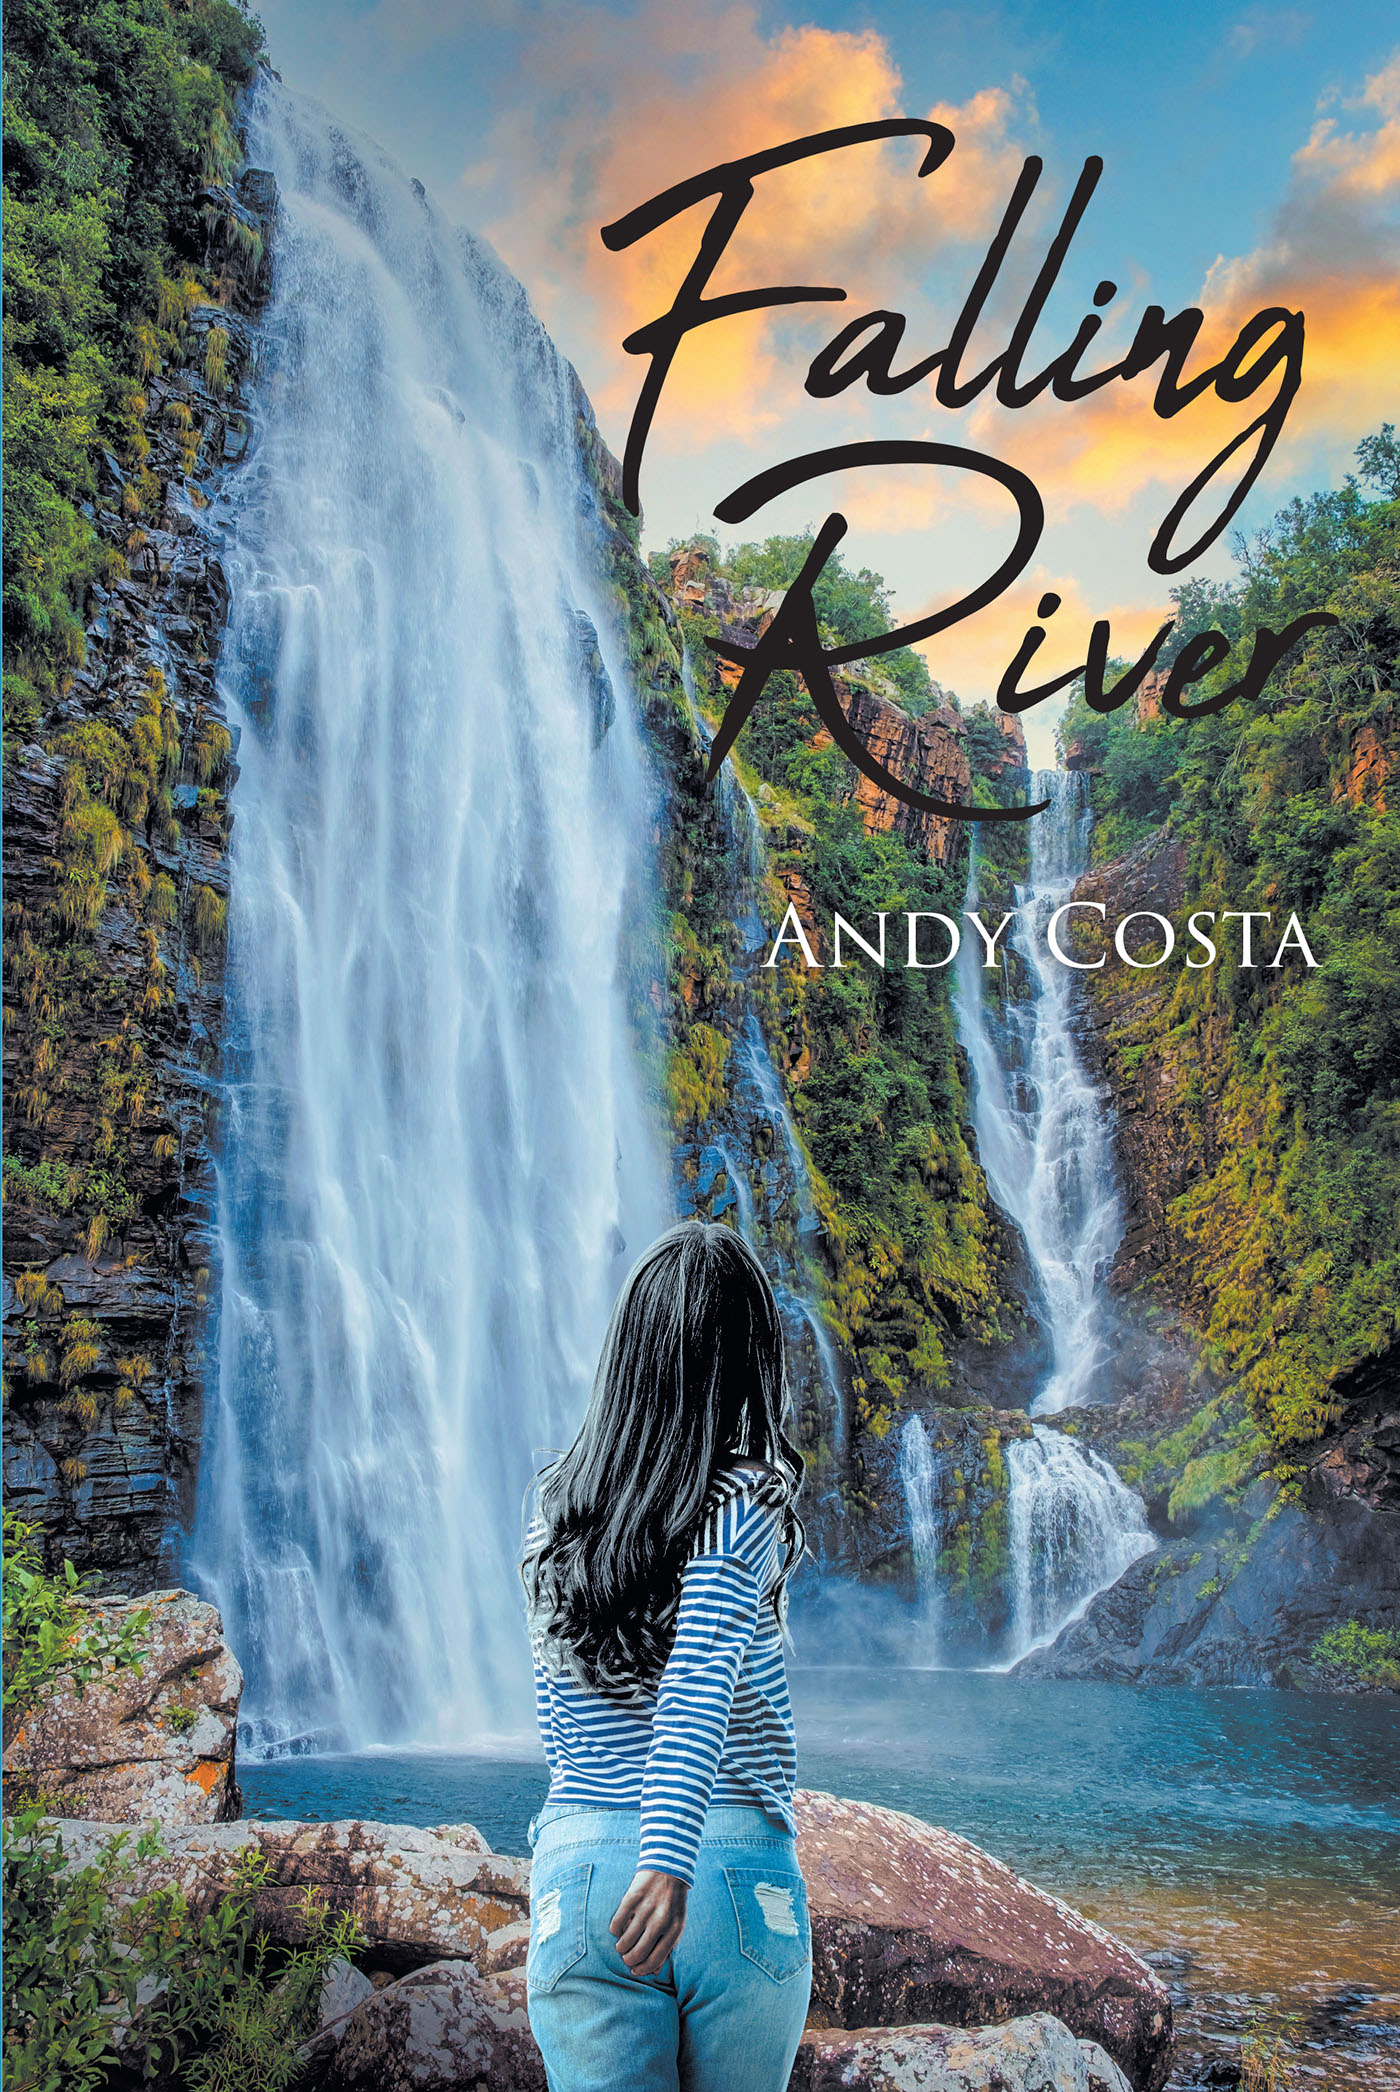 Author Andy Costa’s New Book, "Falling River," is an Intriguing Science Fiction Novel About a Little Girl Who is Actually a 300-Year-Old Skin Walker